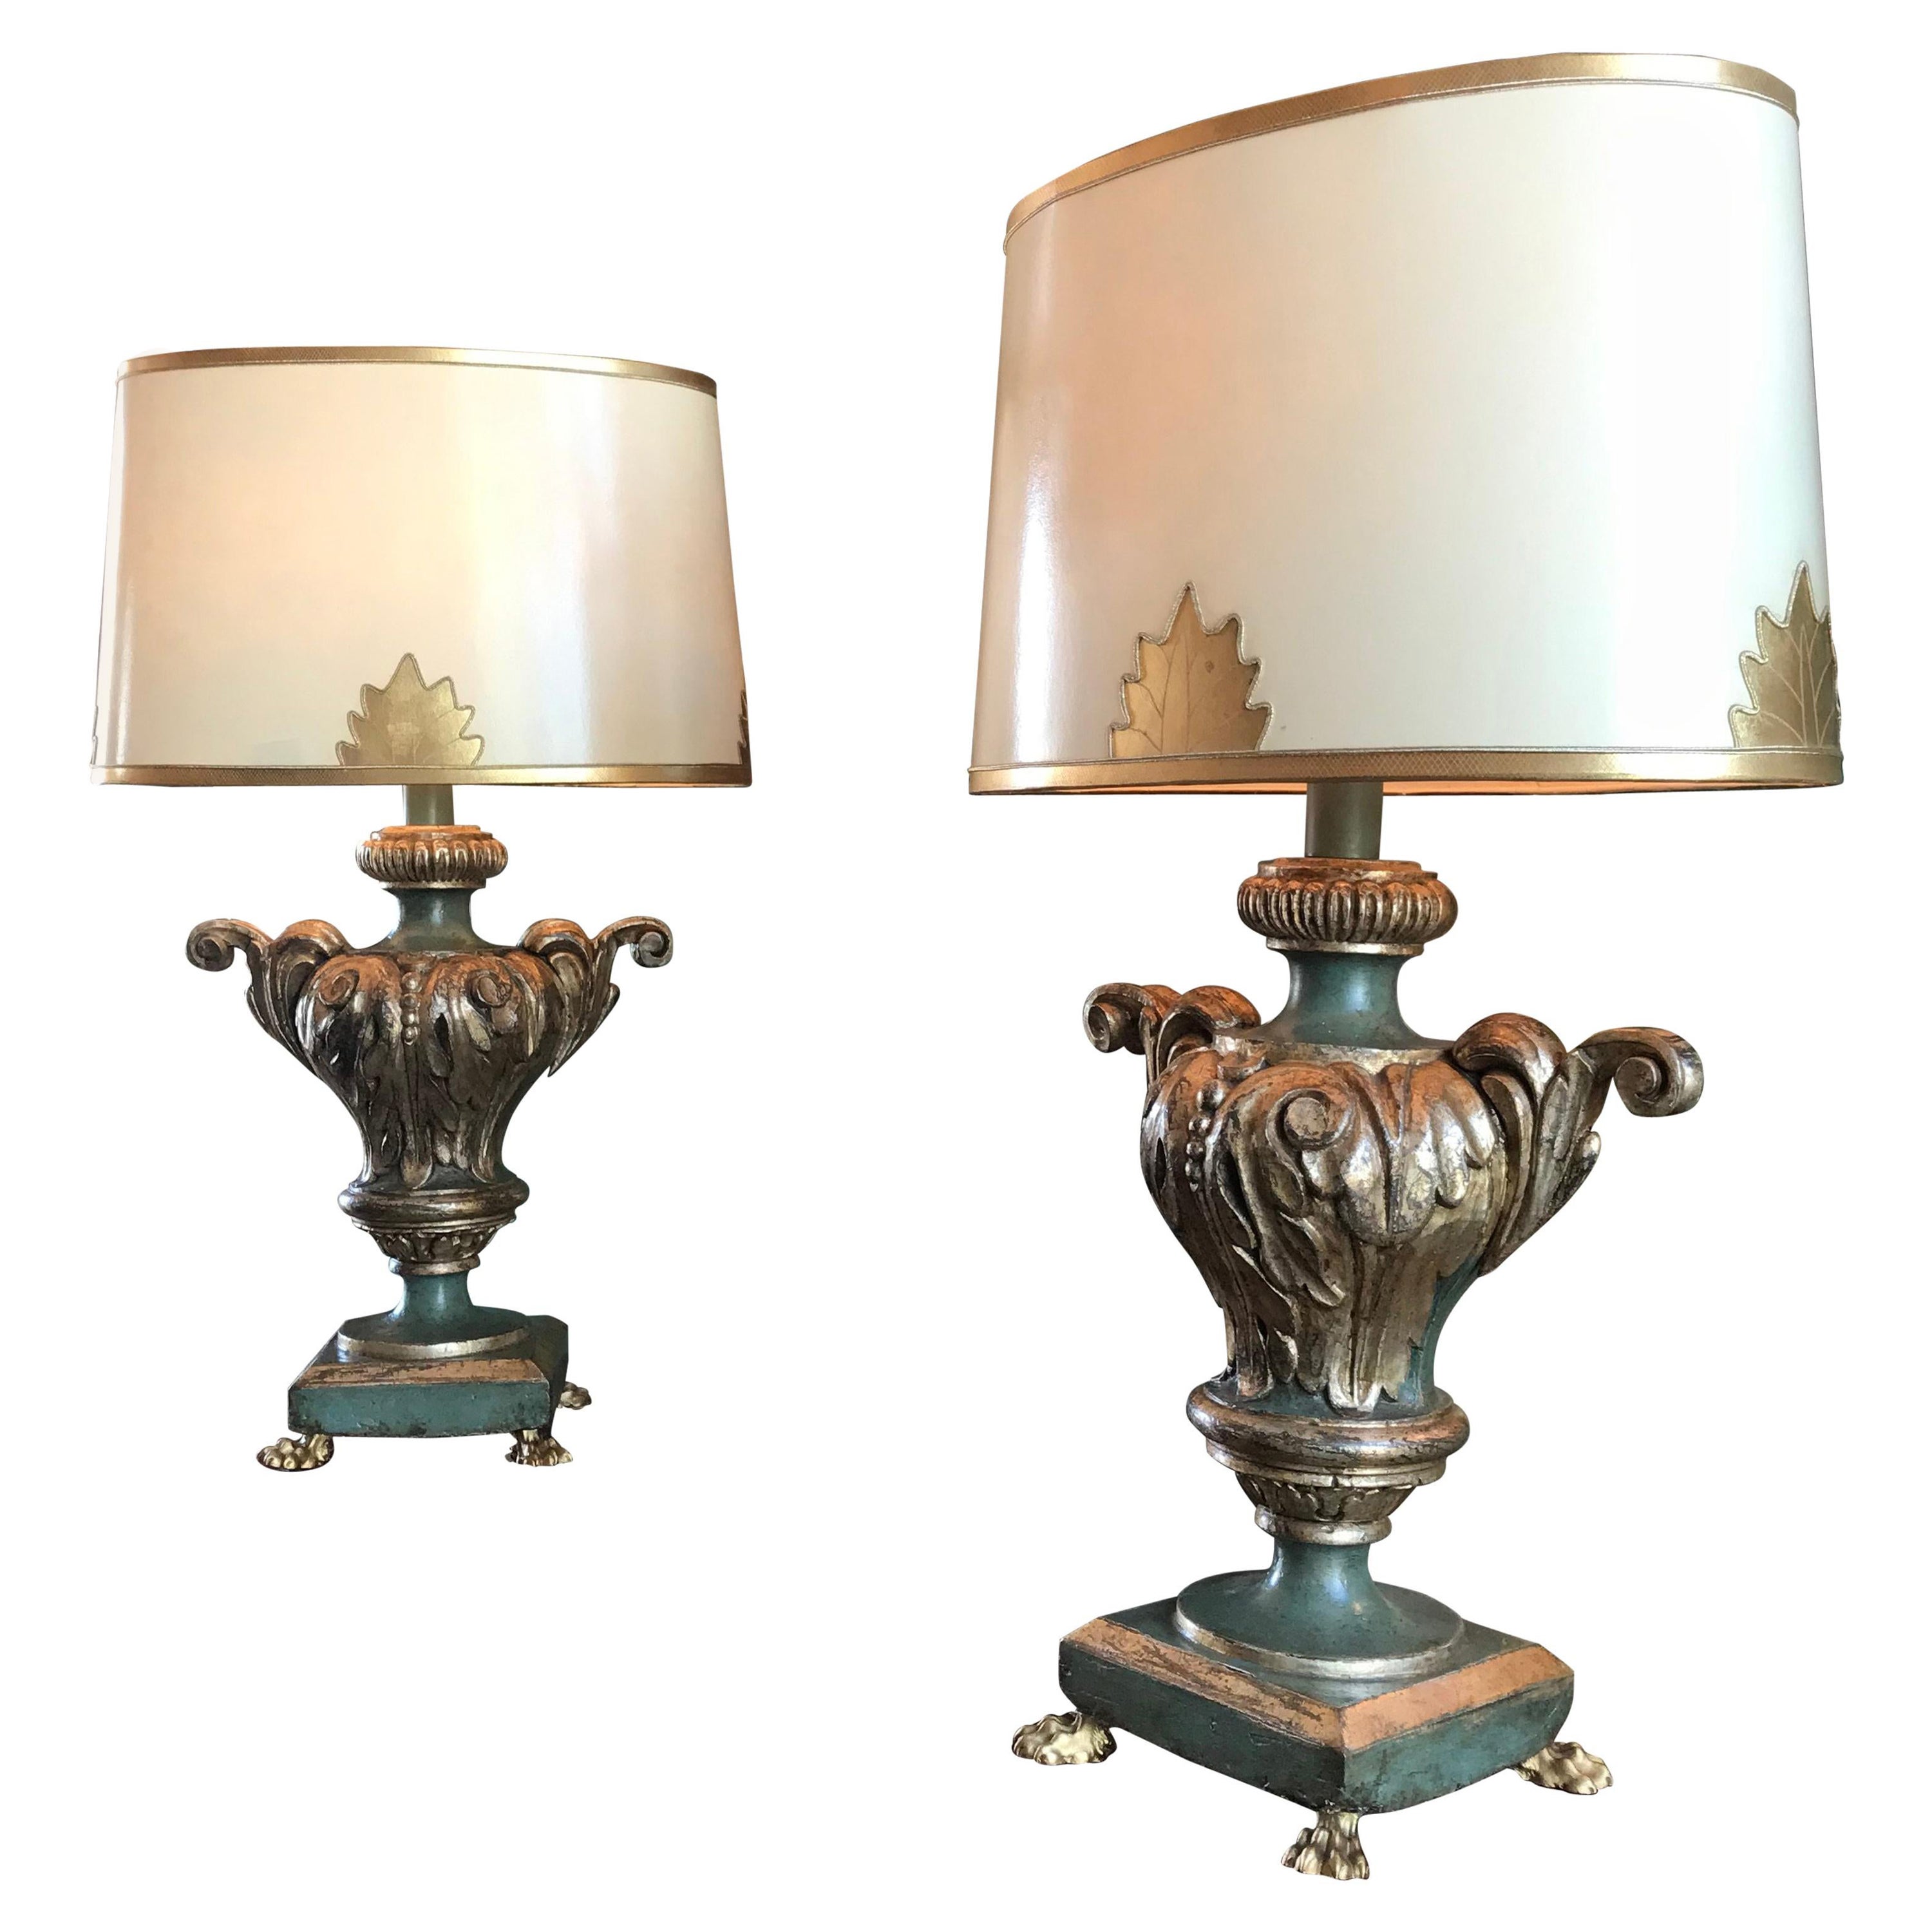 Pair Table Lamps Antique Venetian Carved Wood Urns Gilt Green / Shades & Finial For Sale